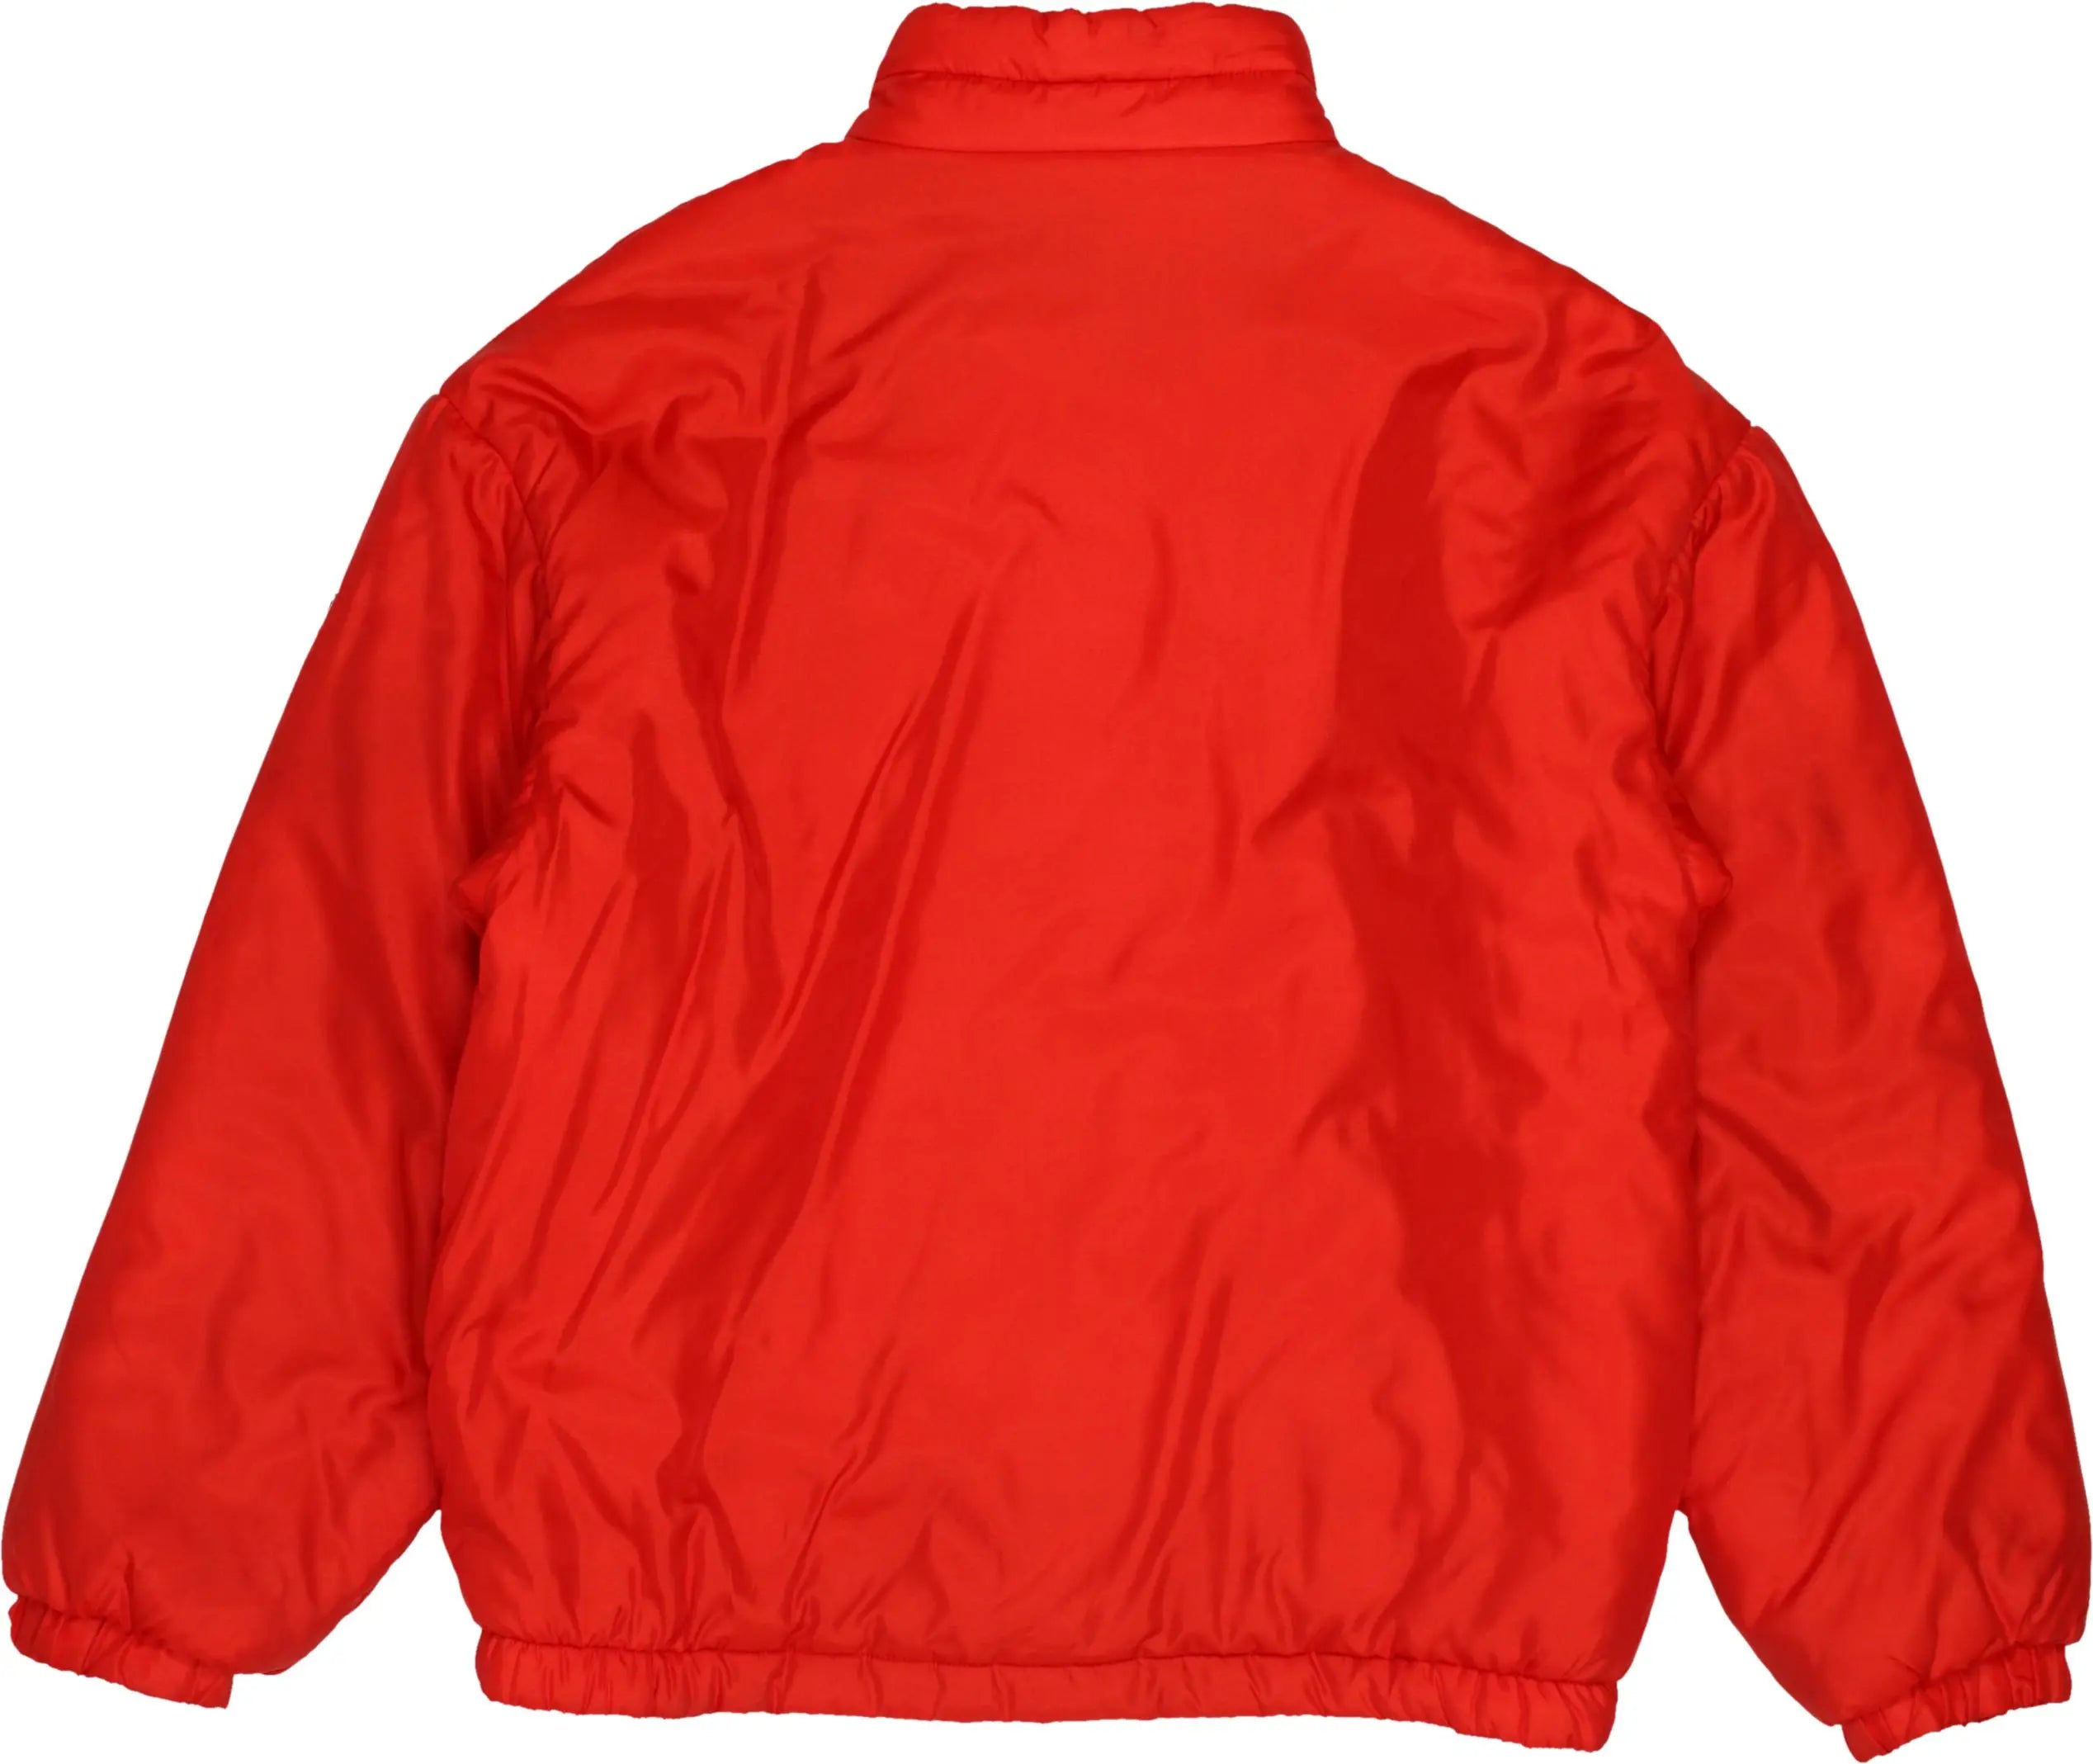 Mc Kee's - 70s Padded Jacket- ThriftTale.com - Vintage and second handclothing